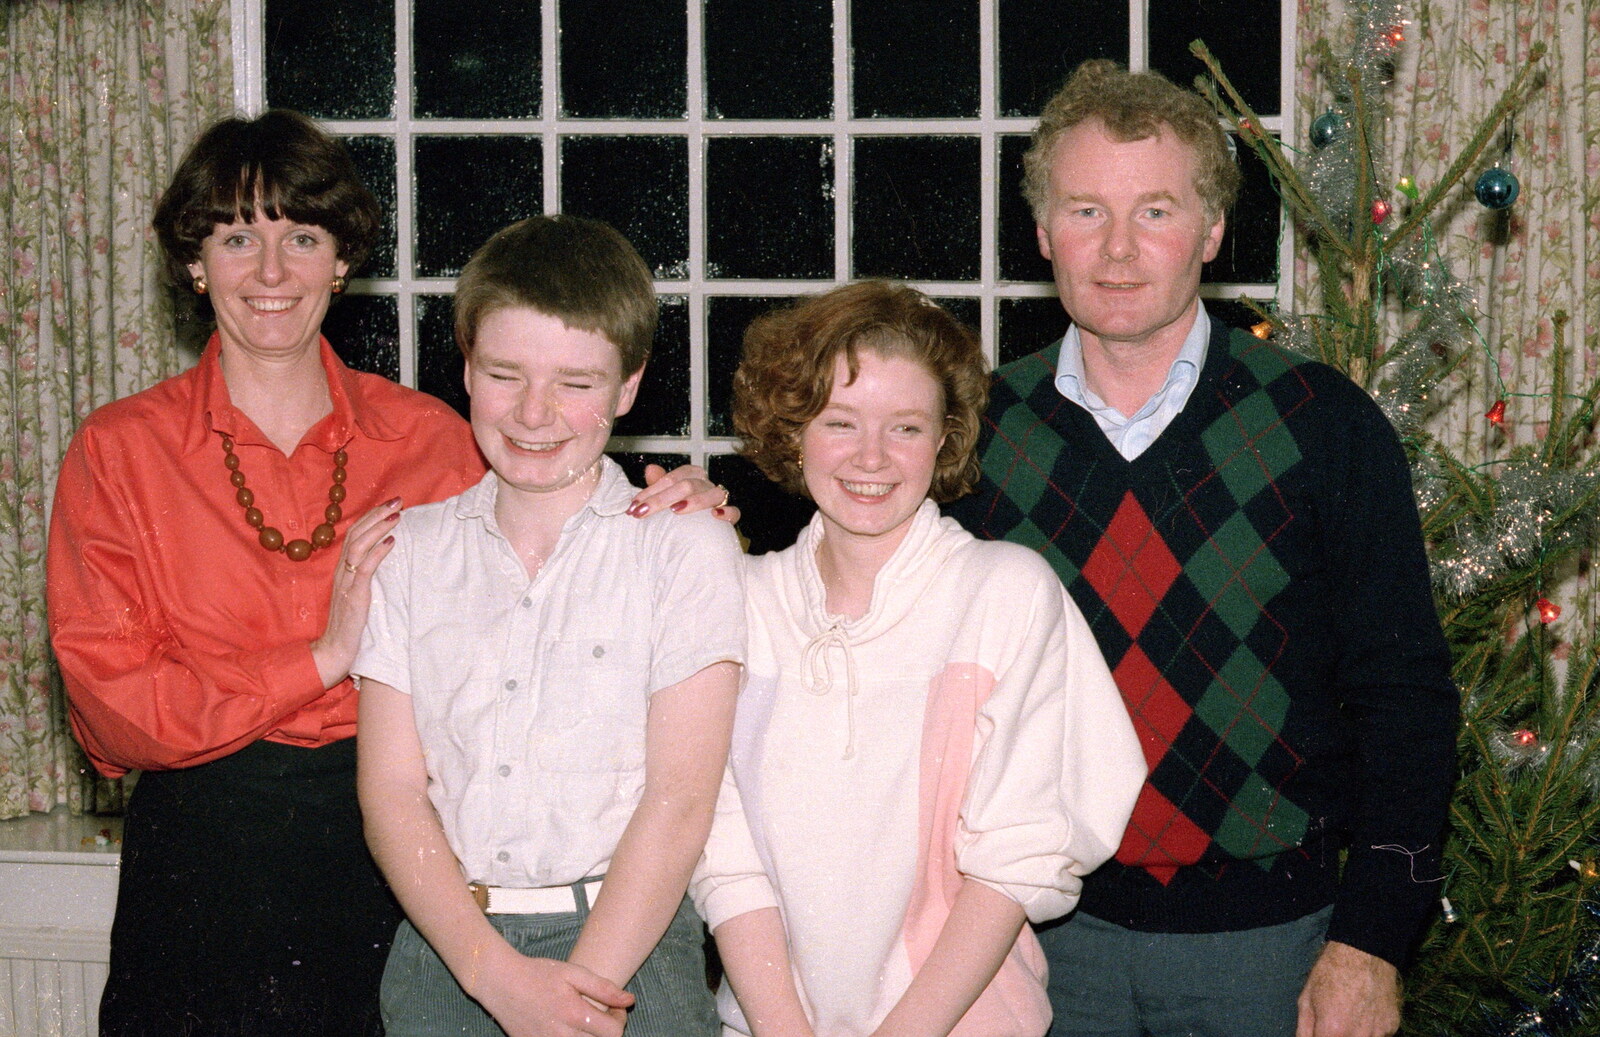 A family photo from Christmas in Macclesfield and Wetherby, Cheshire  and Yorkshire - 25th December 1985